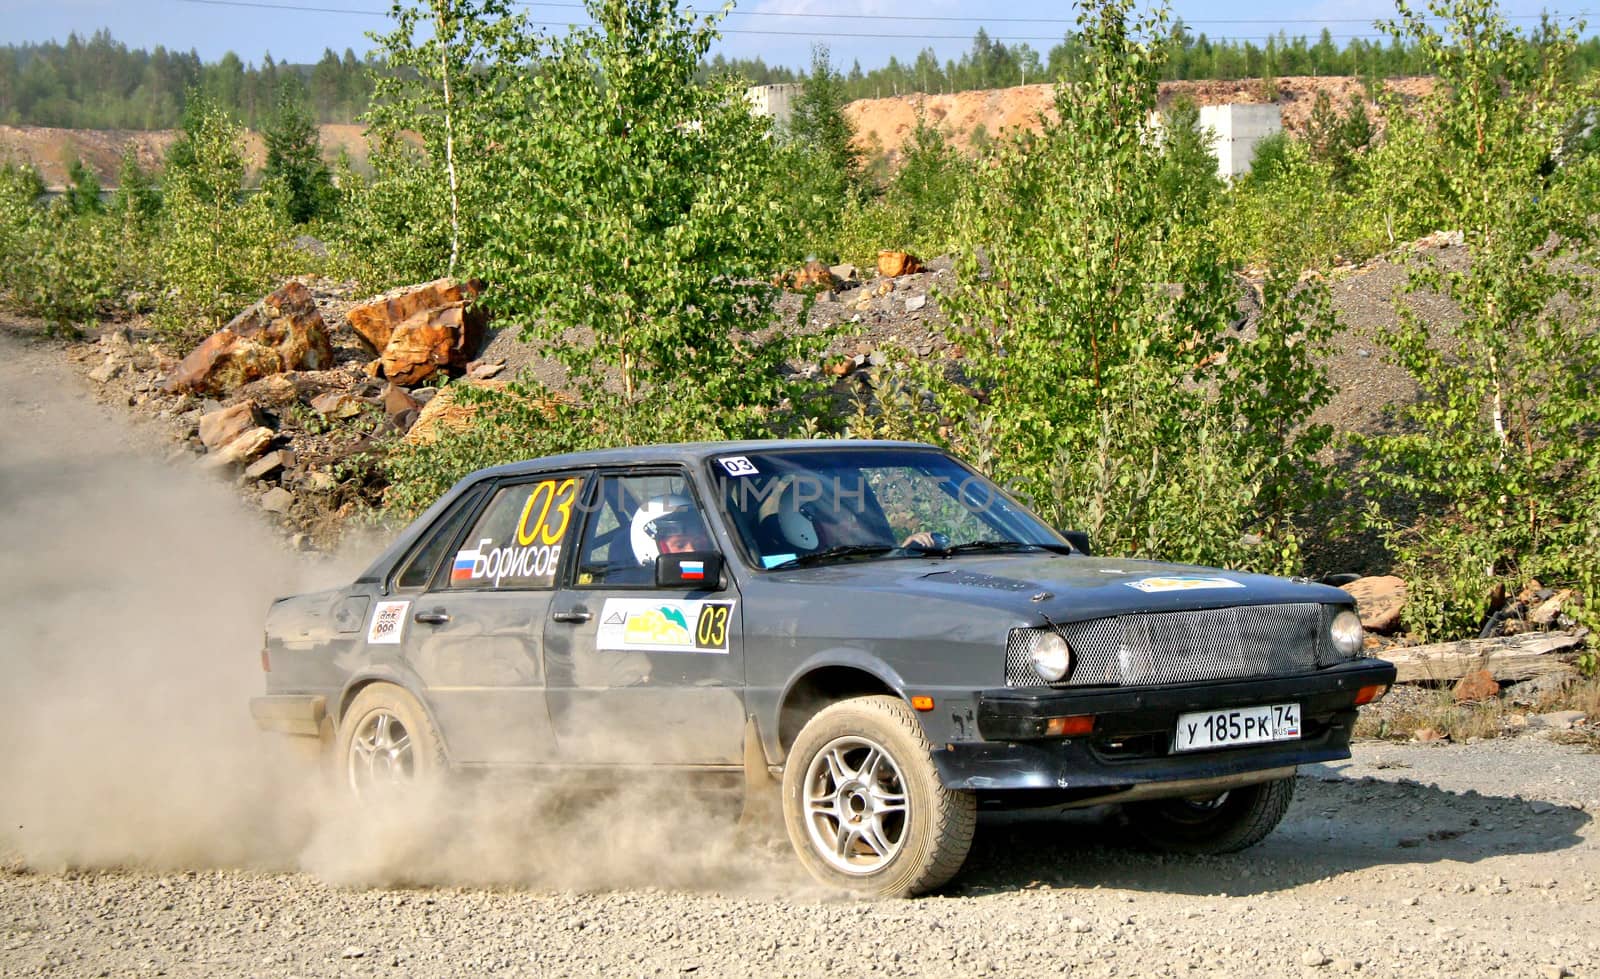 BAKAL, RUSSIA - AUGUST 13: Viktor Borisov's Audi 80 (No. 03) competes at the annual Rally Southern Ural on August 13, 2010 in Bakal, Satka district, Chelyabinsk region, Russia.